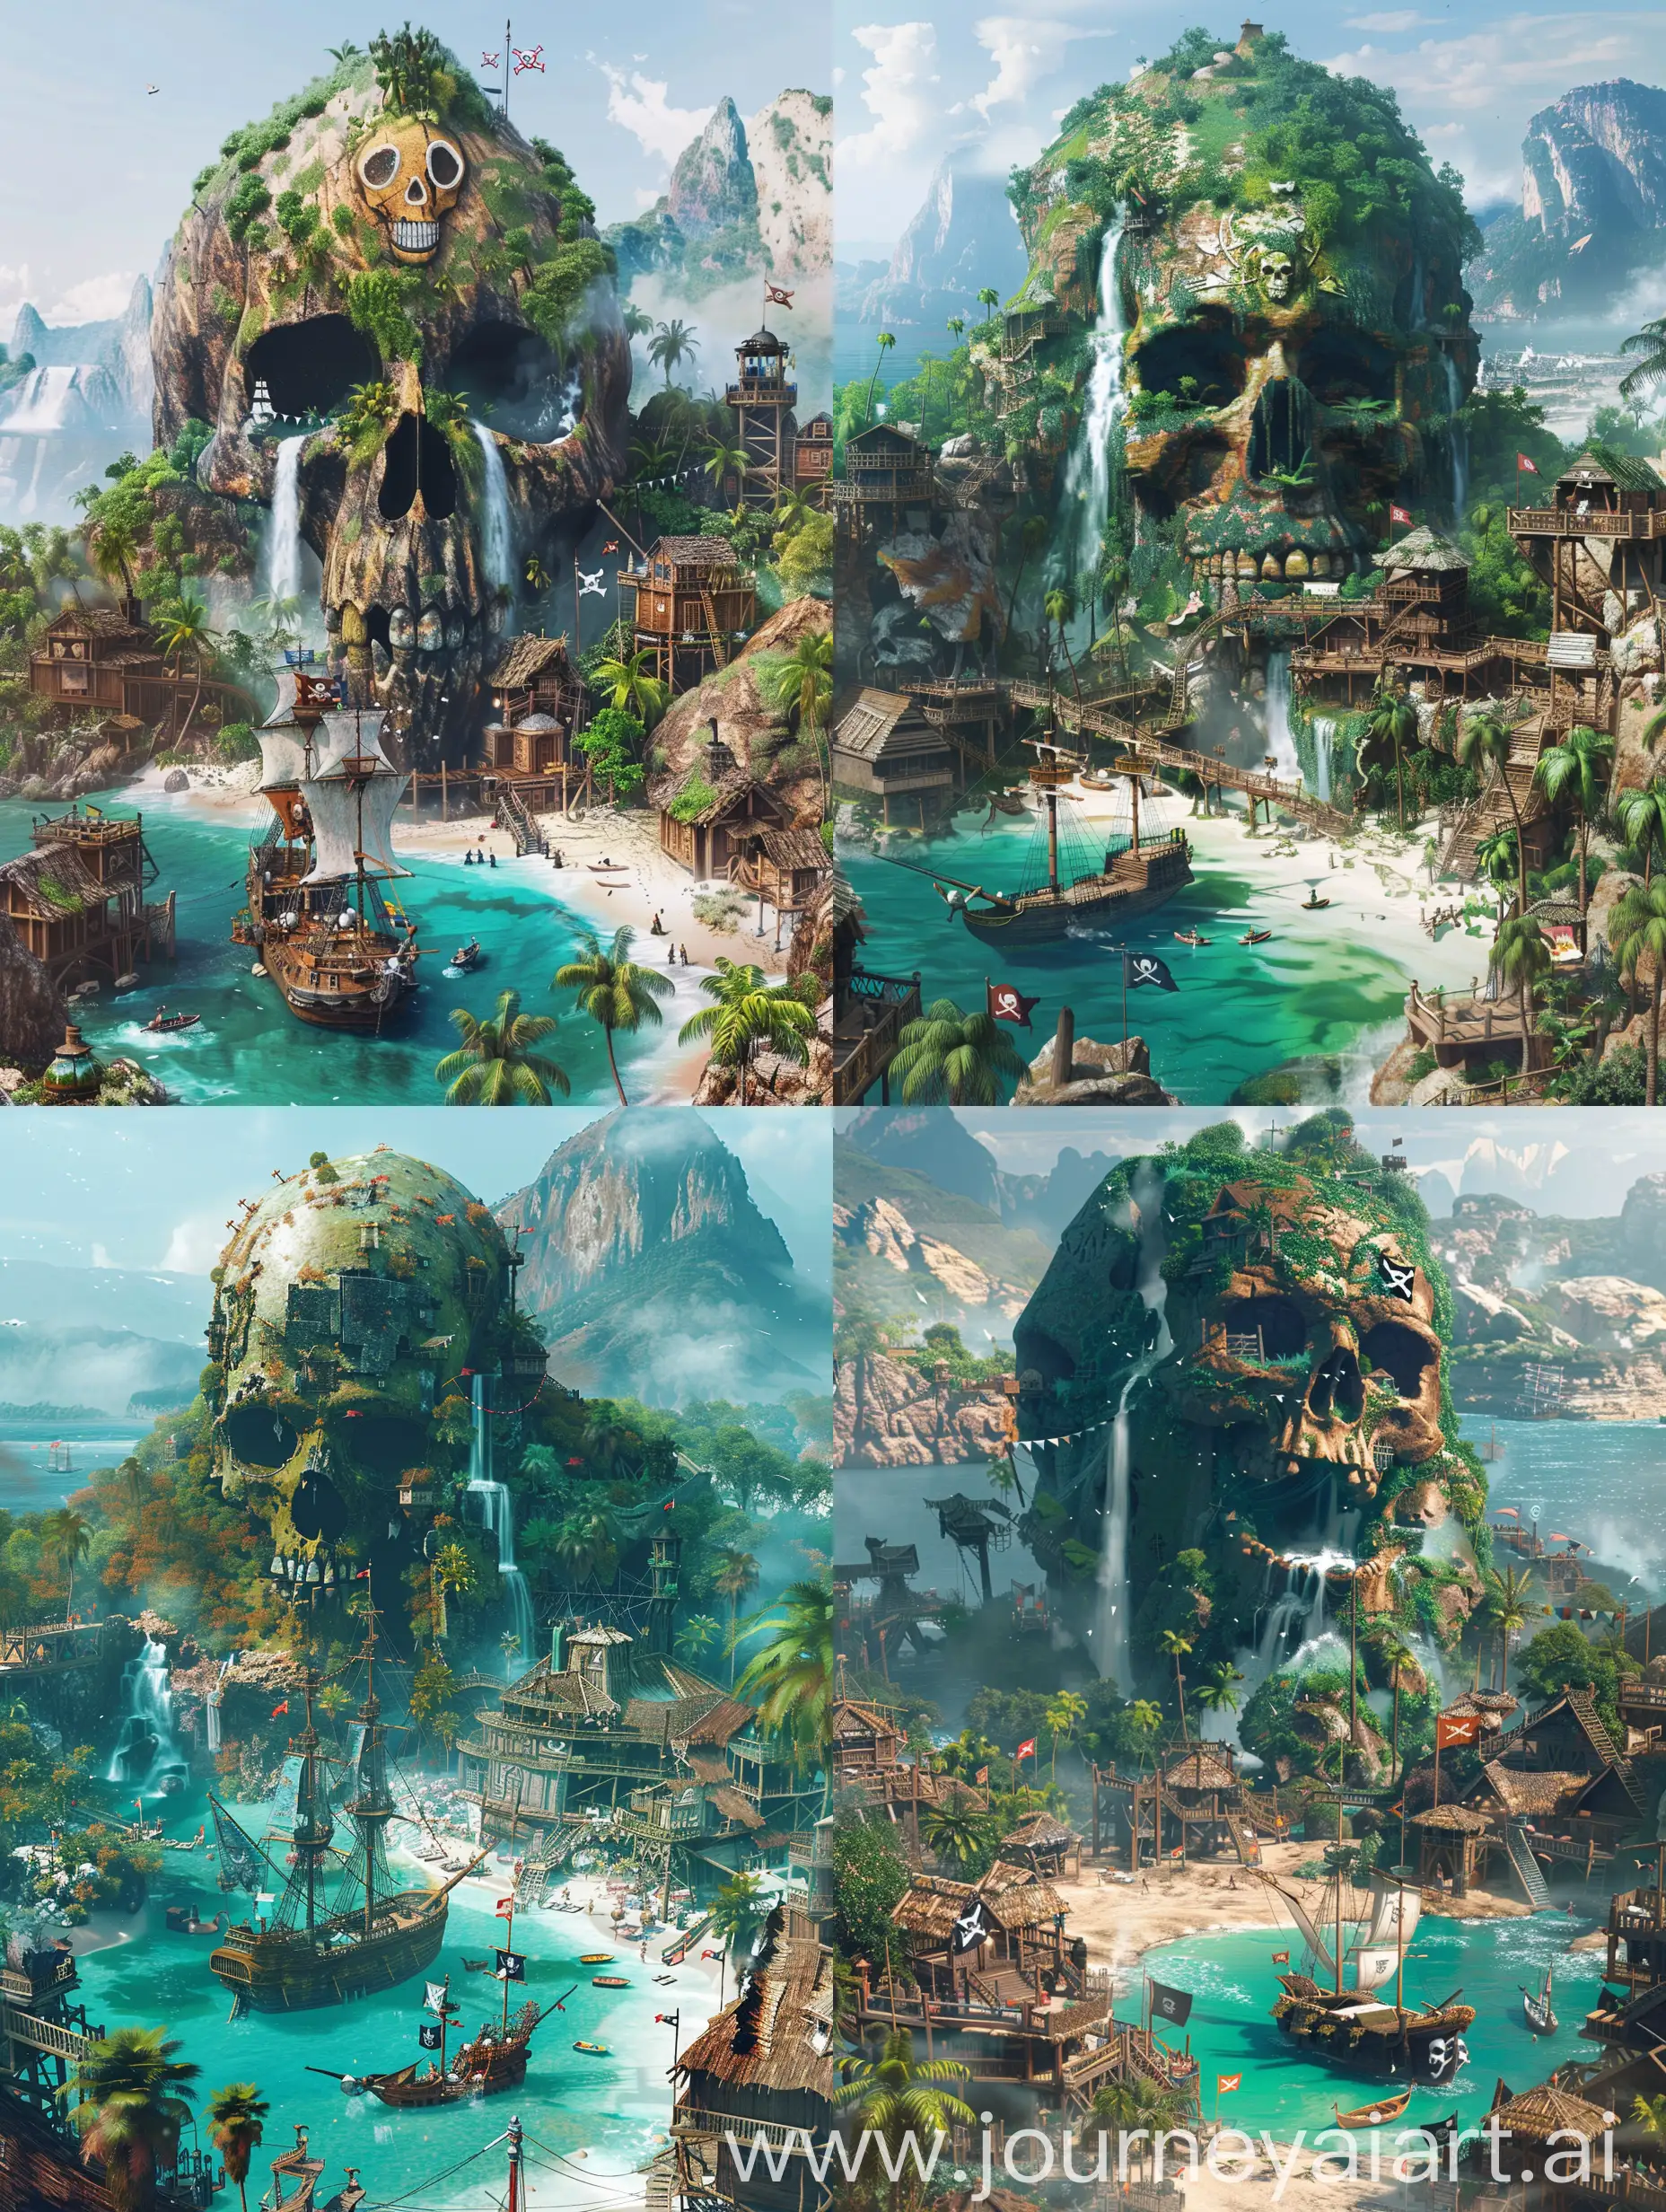 a digital art a pirate-themed island. It's captured from an elevated perspective which gives a comprehensive view of the entire scene. At the center, there's a large skull-shaped mountain with greenery and waterfalls.A pirate ship is anchored near the shore, with its sails unfurled, surrounded by smaller boats.The island features wooden structures, including houses and lookout towers.There are palm trees, sandy beaches, and clear blue waters that contribute to the tropical atmosphere.In the background,distant mountains covered in mist add depth to the landscape.Pirate flags are visible, indicating the theme of the location.The angle of the shot provides a bird's-eye view of the island, allowing to see all these details vividly.